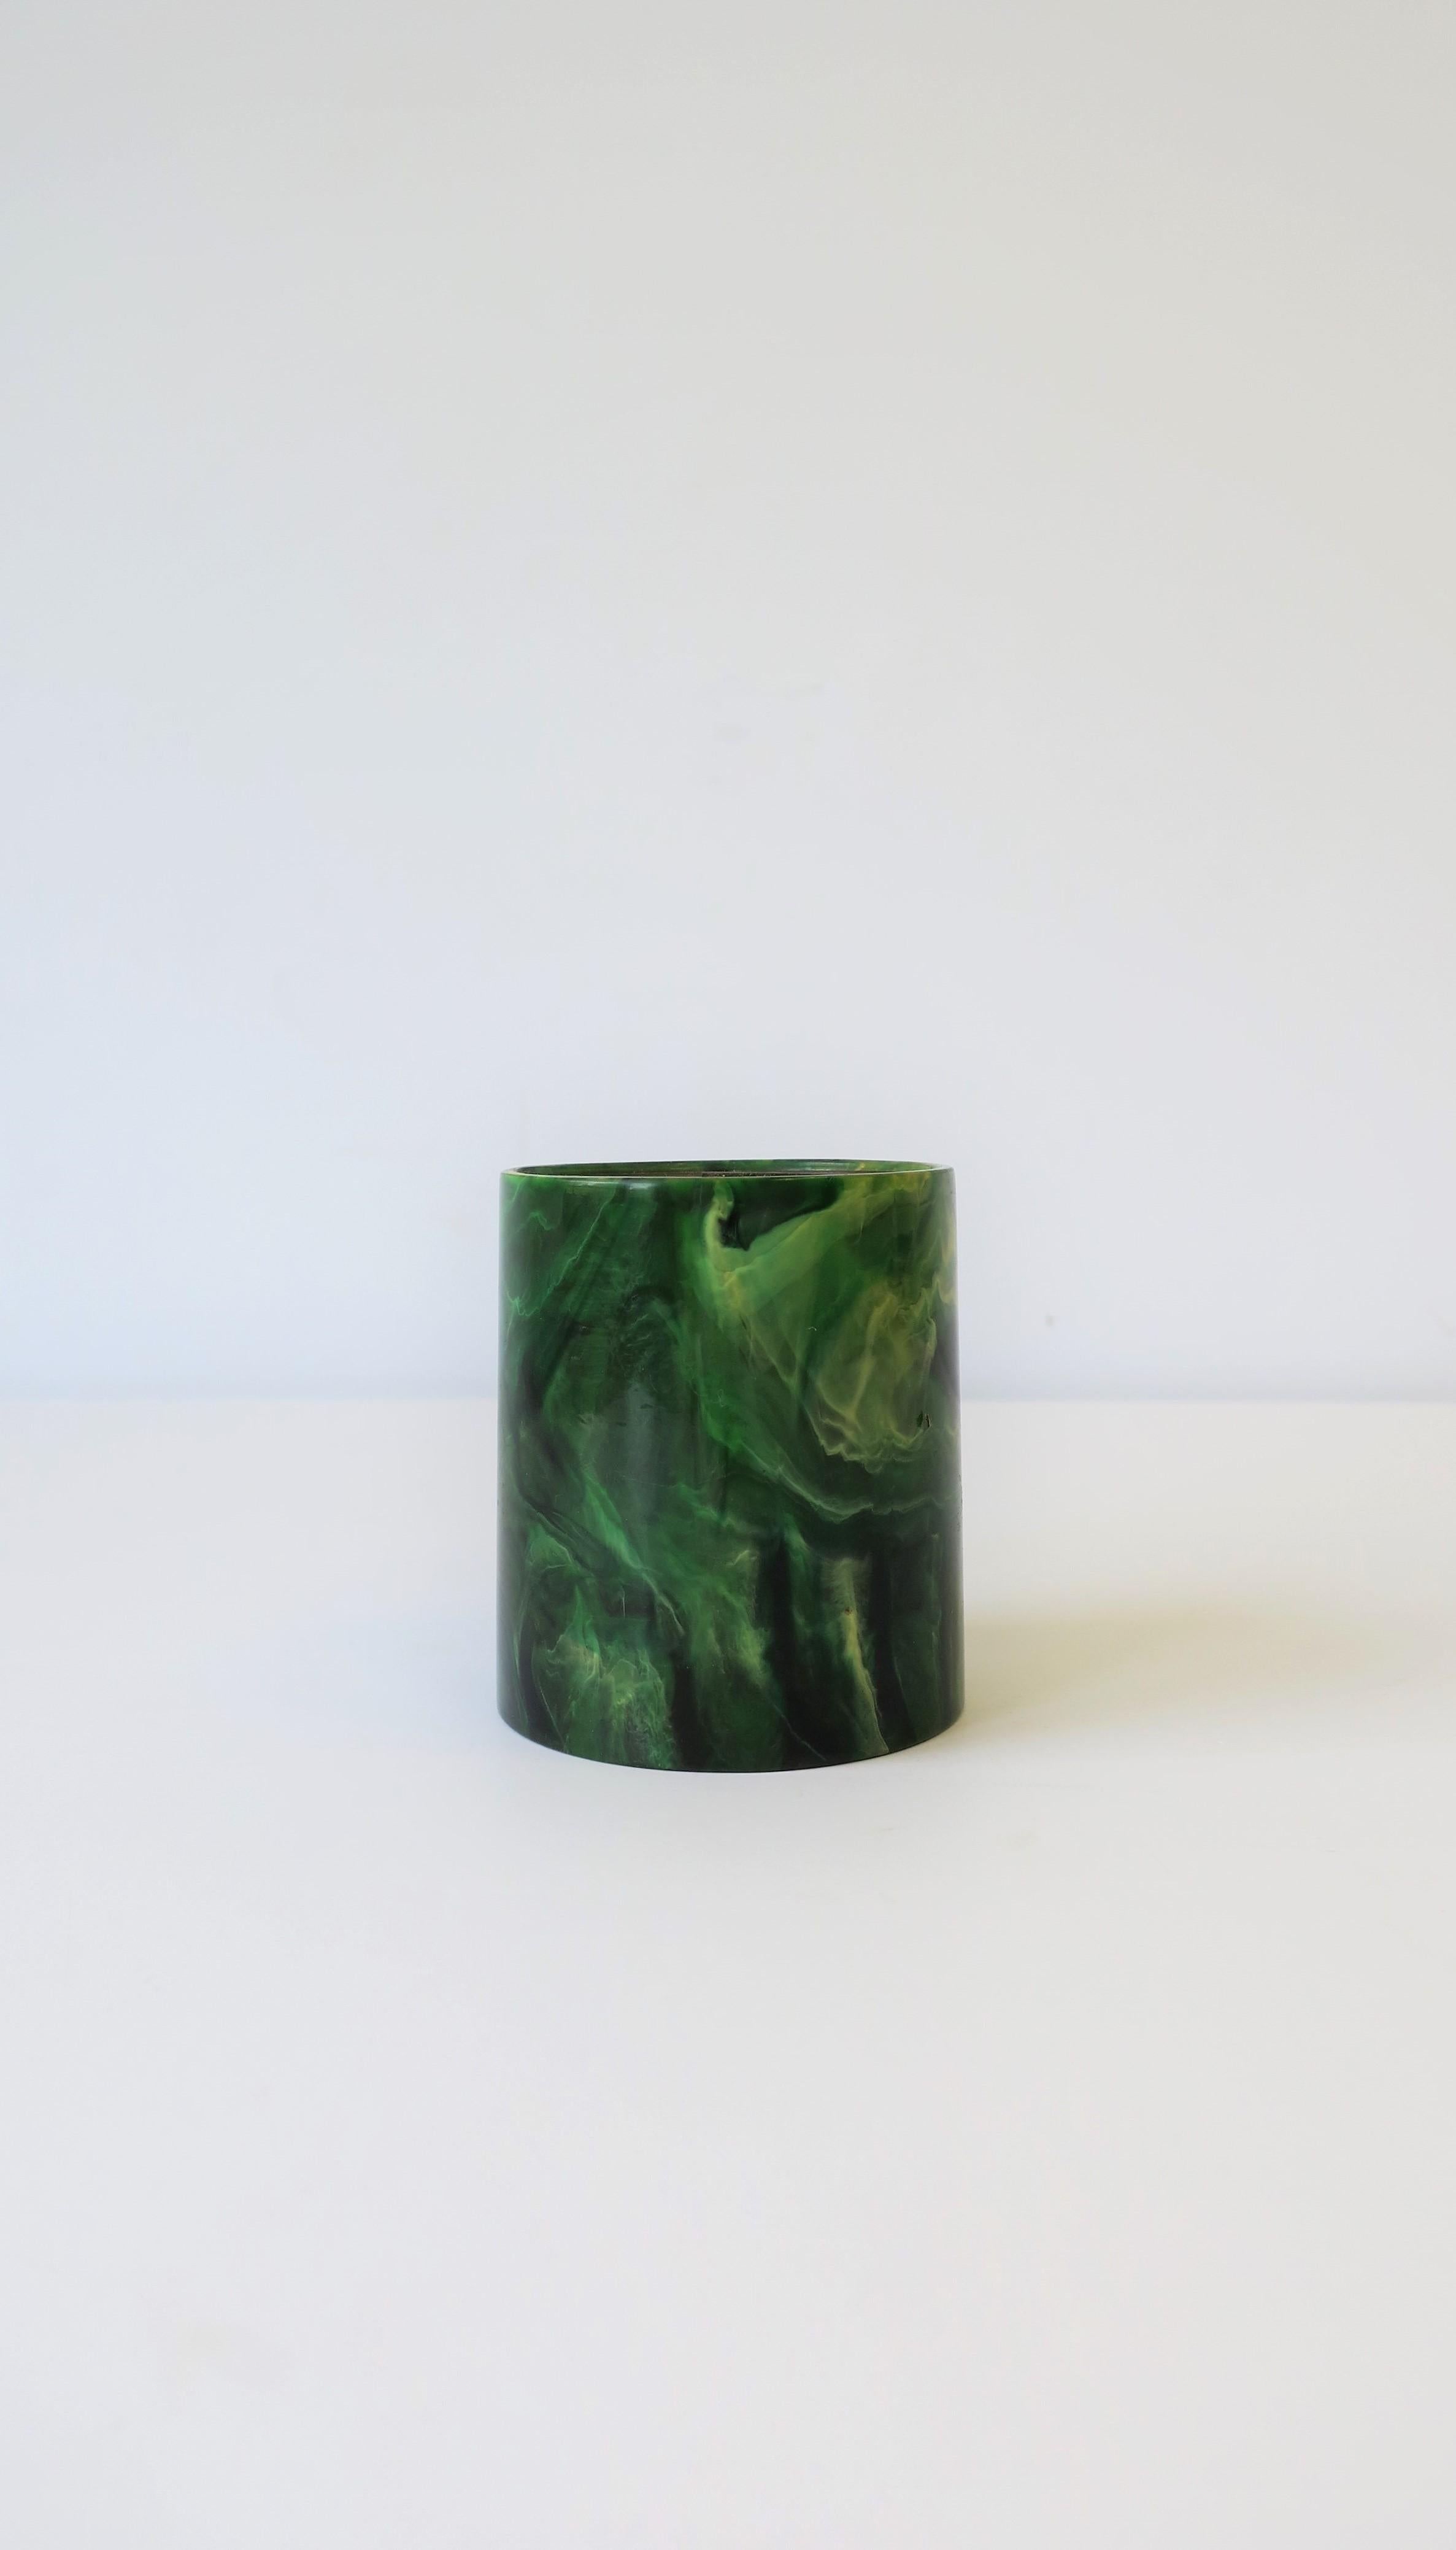 A chic vintage '70s Modern or Postmodern green malachite style desk pen/pencil holder cup, circa 1970s.

Piece measures: 2.75